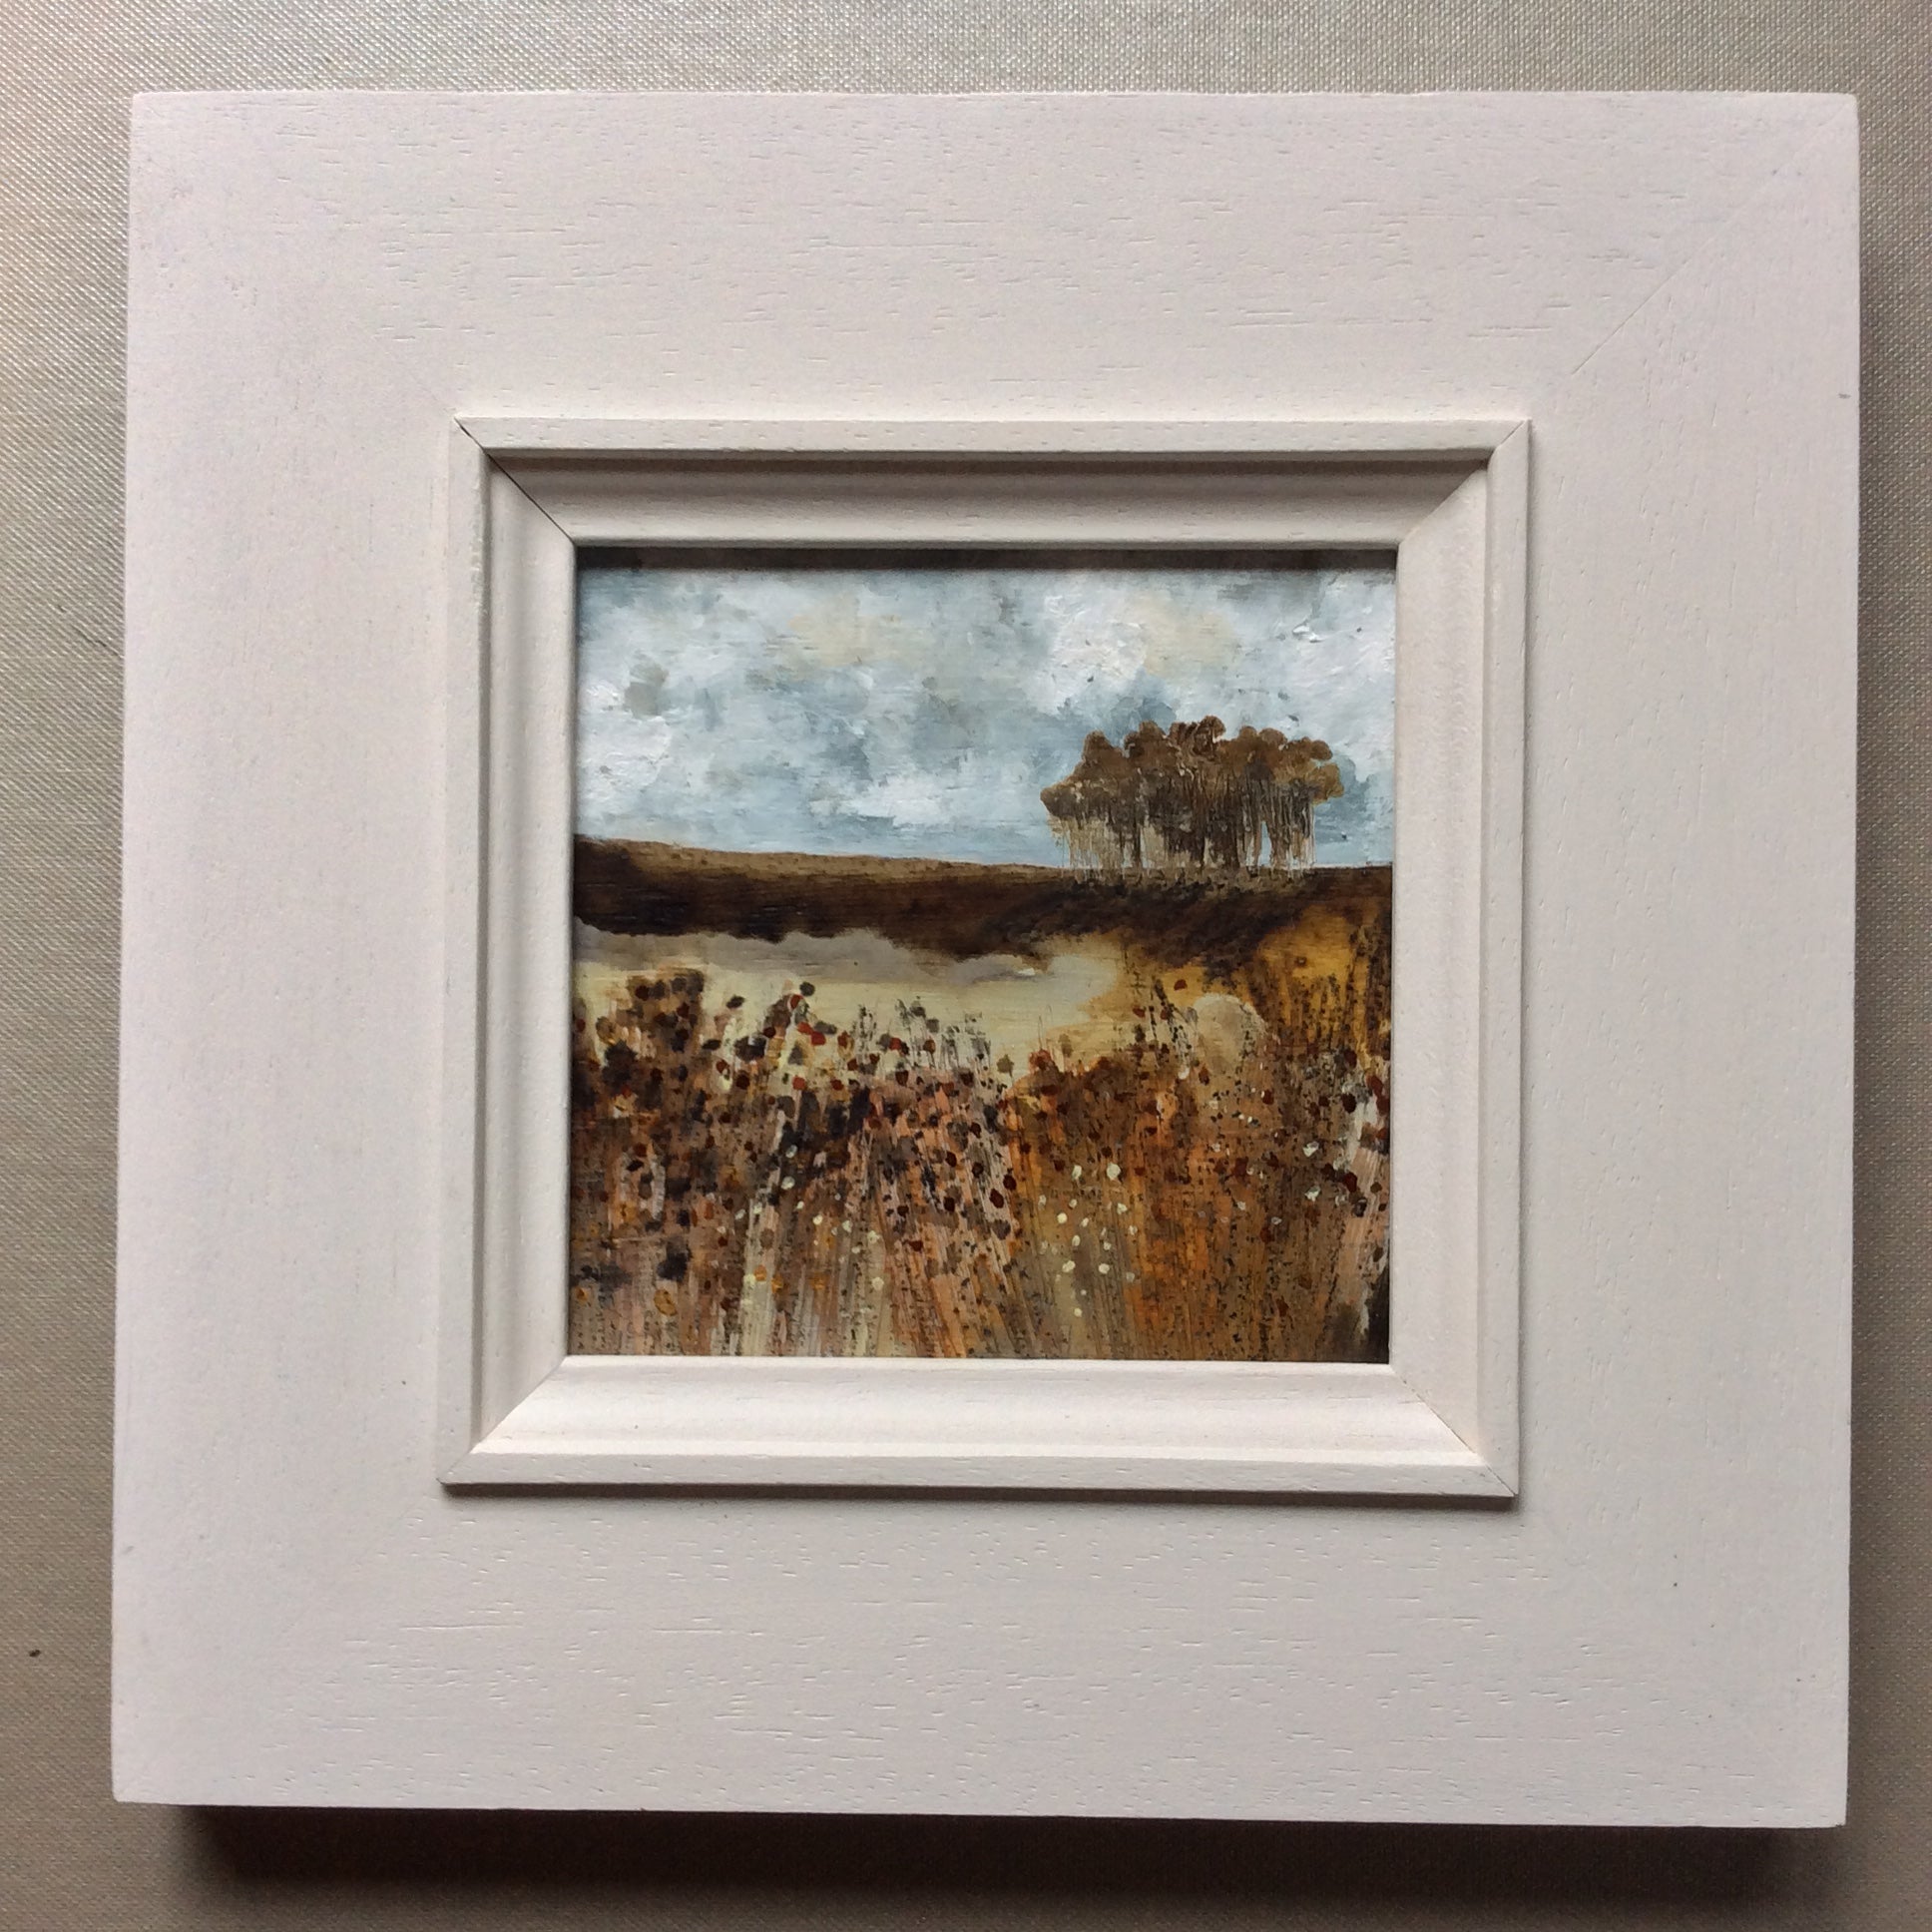 Mixed Media Art on wood By Louise O'Hara - "Grove Meadow"